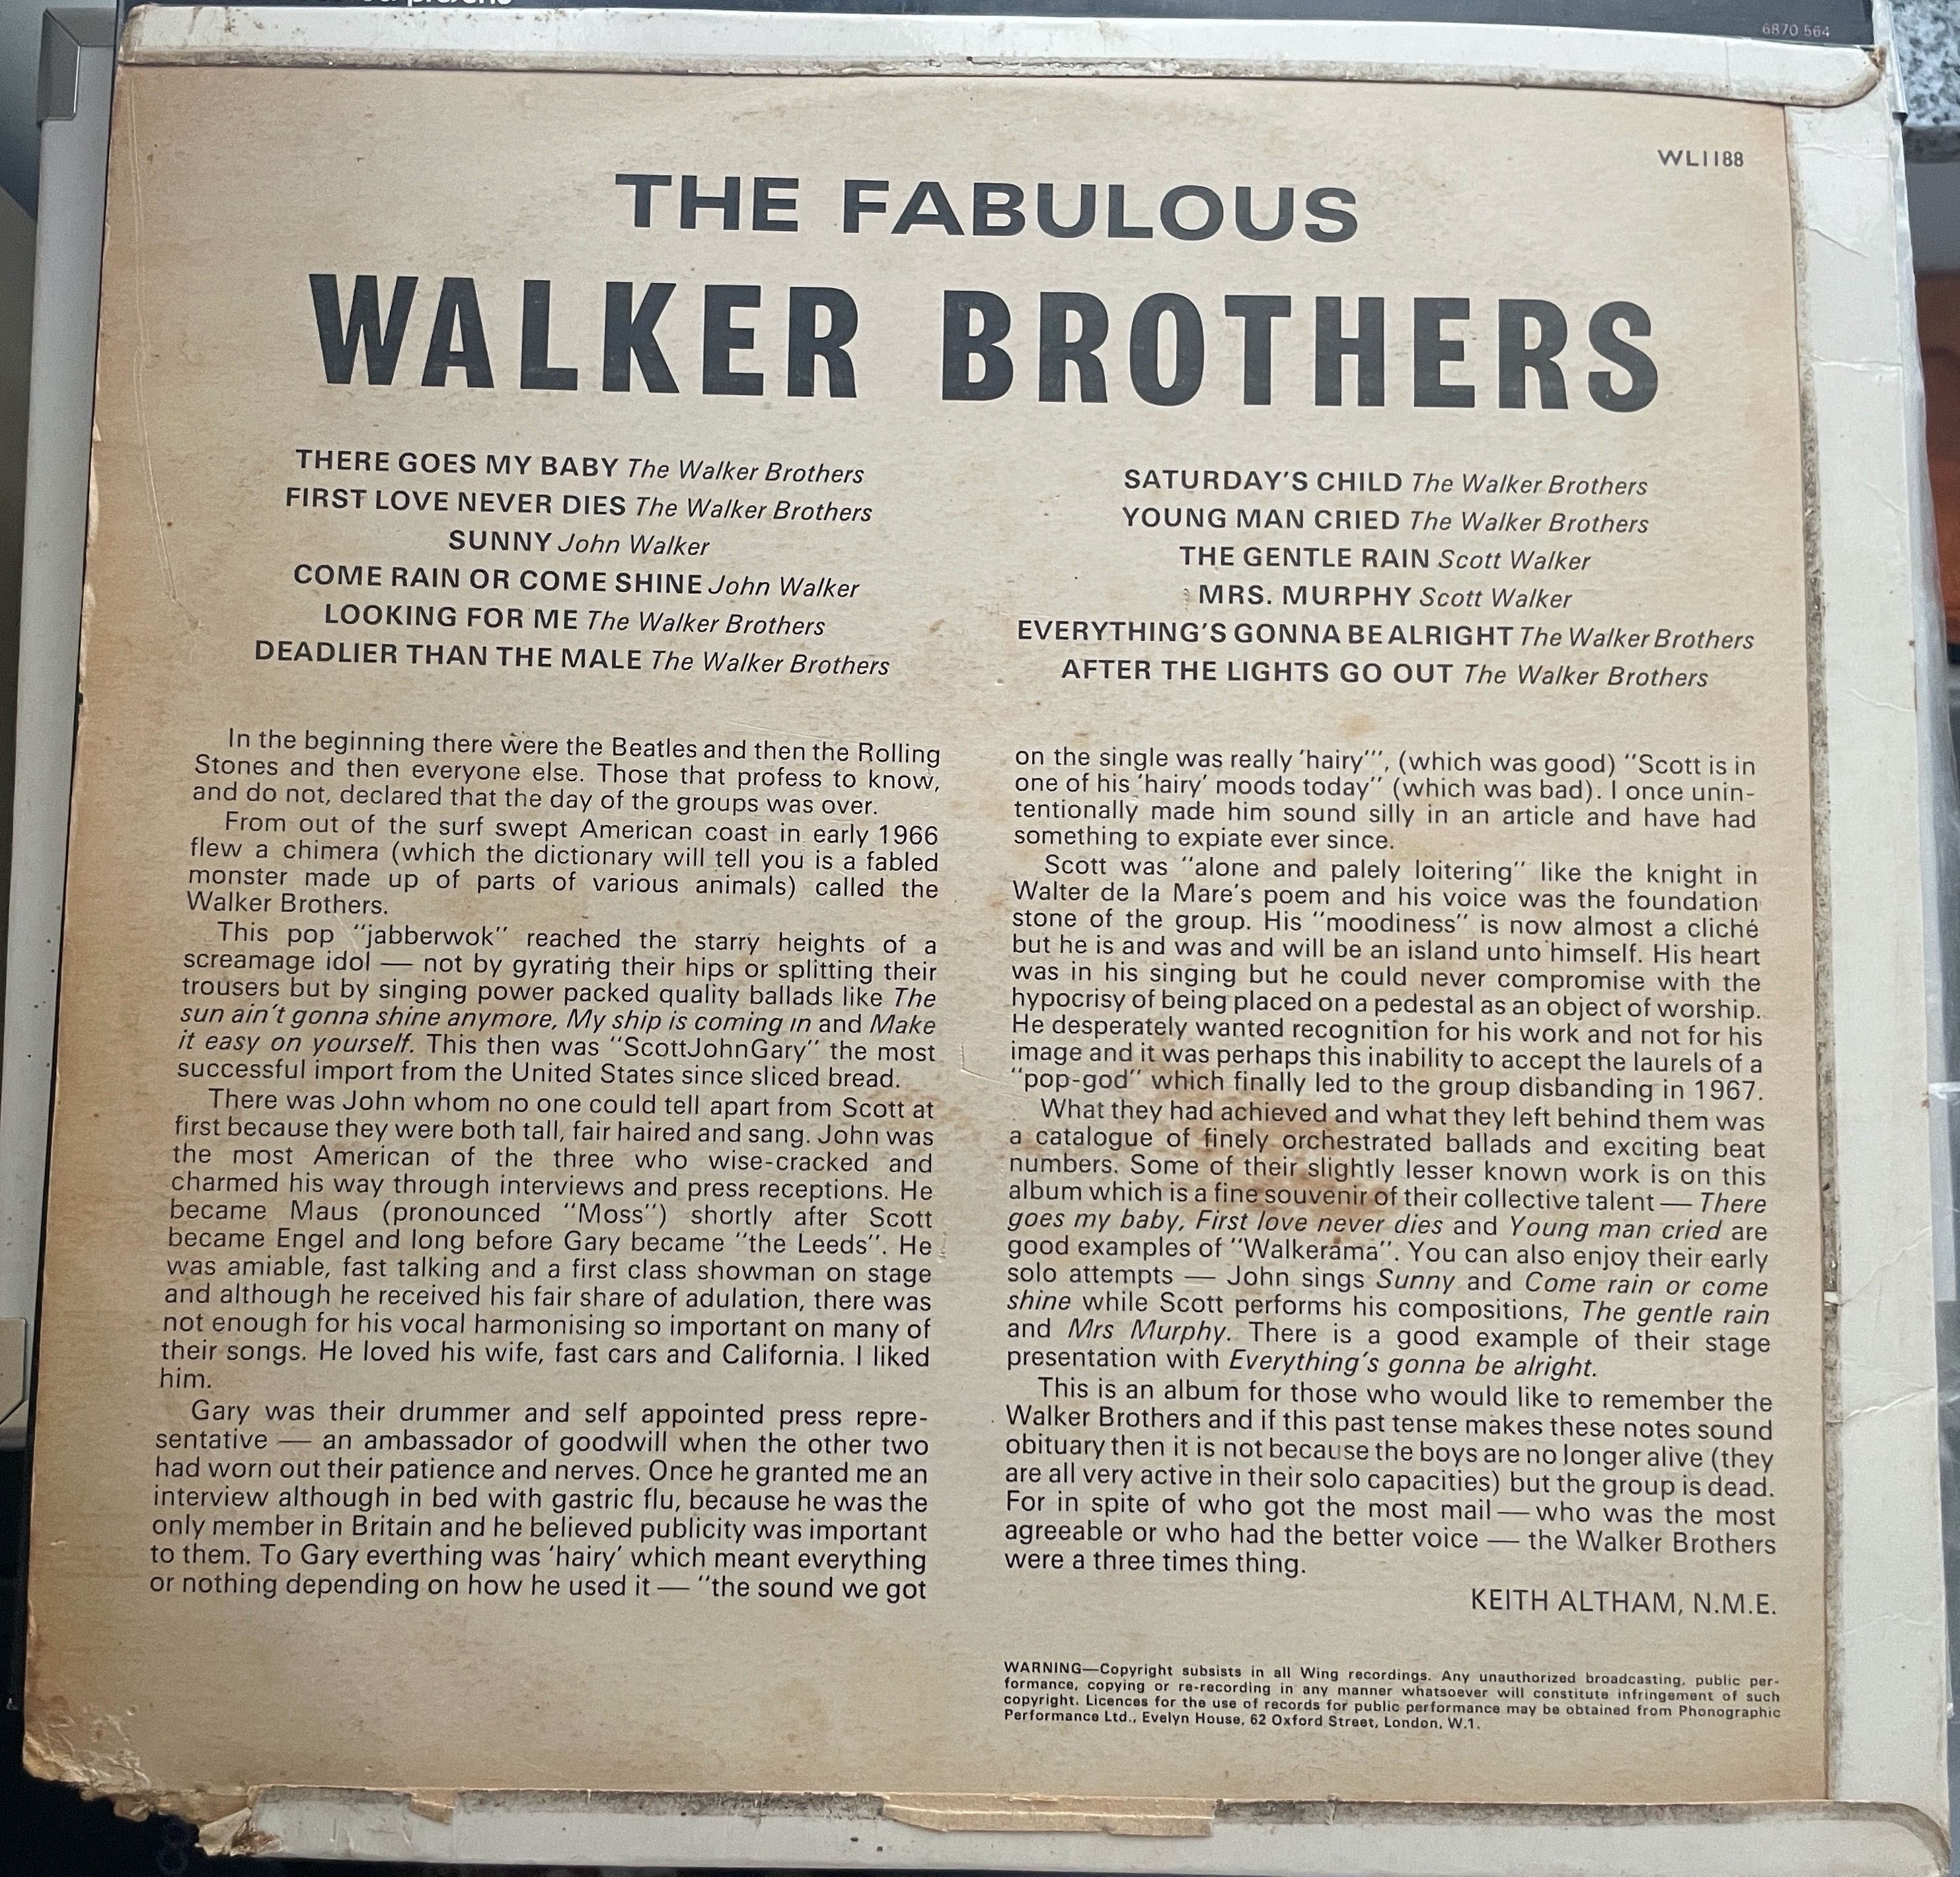 The Fabulous Walker Brothers